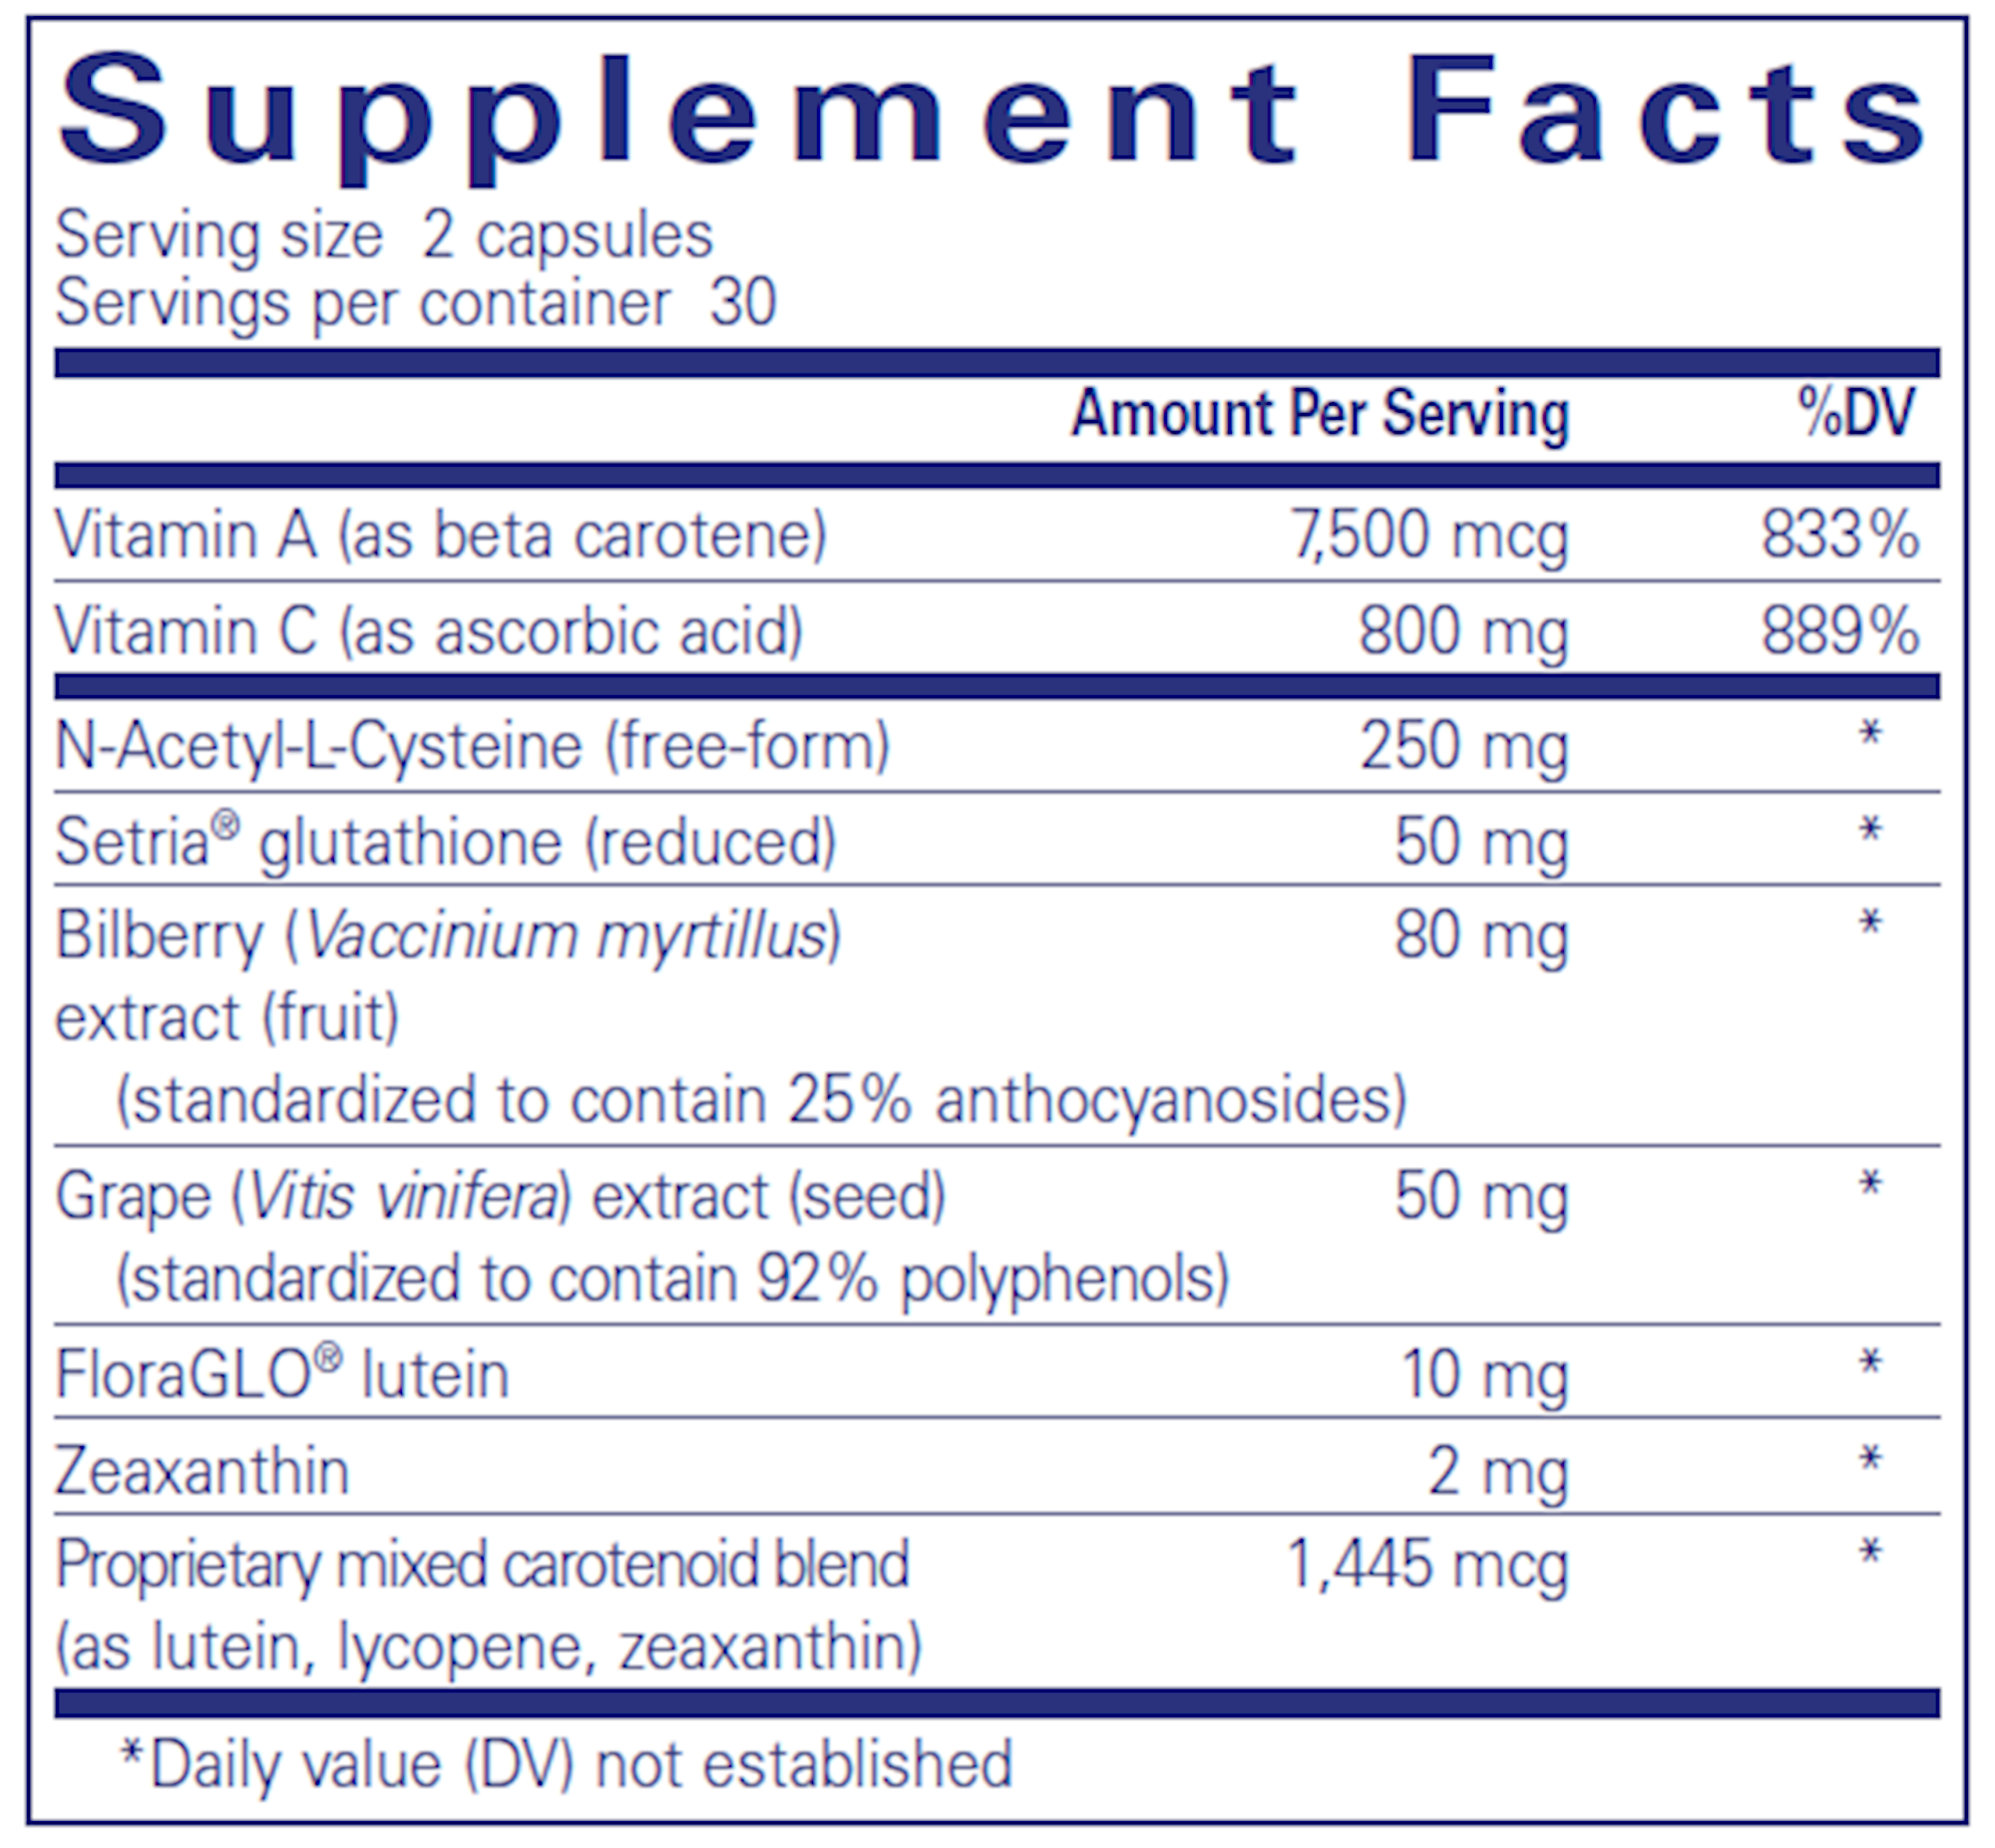 Supplement facts for 